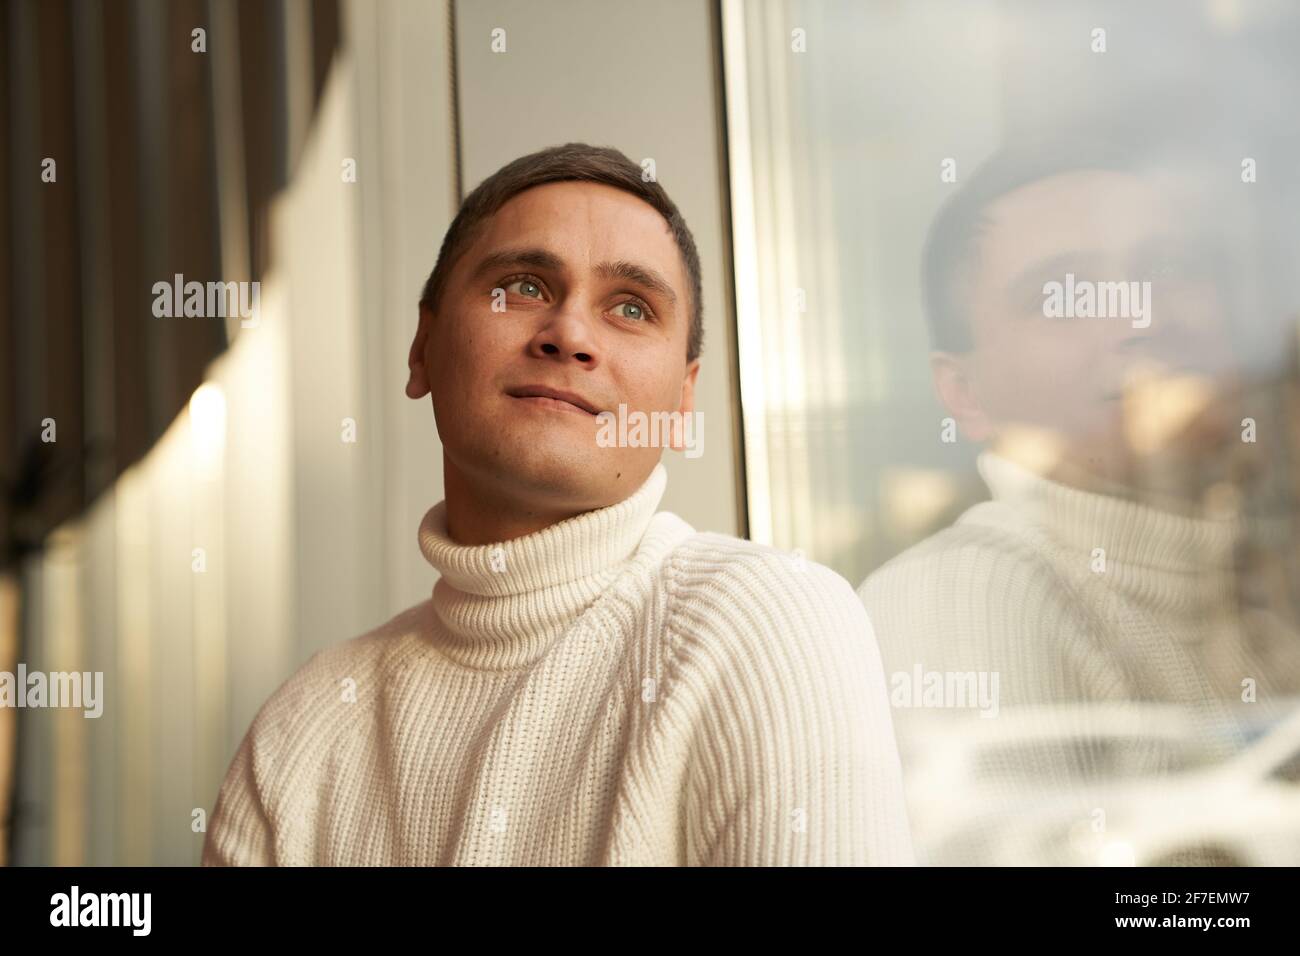 The handsome man in the room smiles and looks into the distance. A man in a white sweater. Copy space. High quality photo Stock Photo